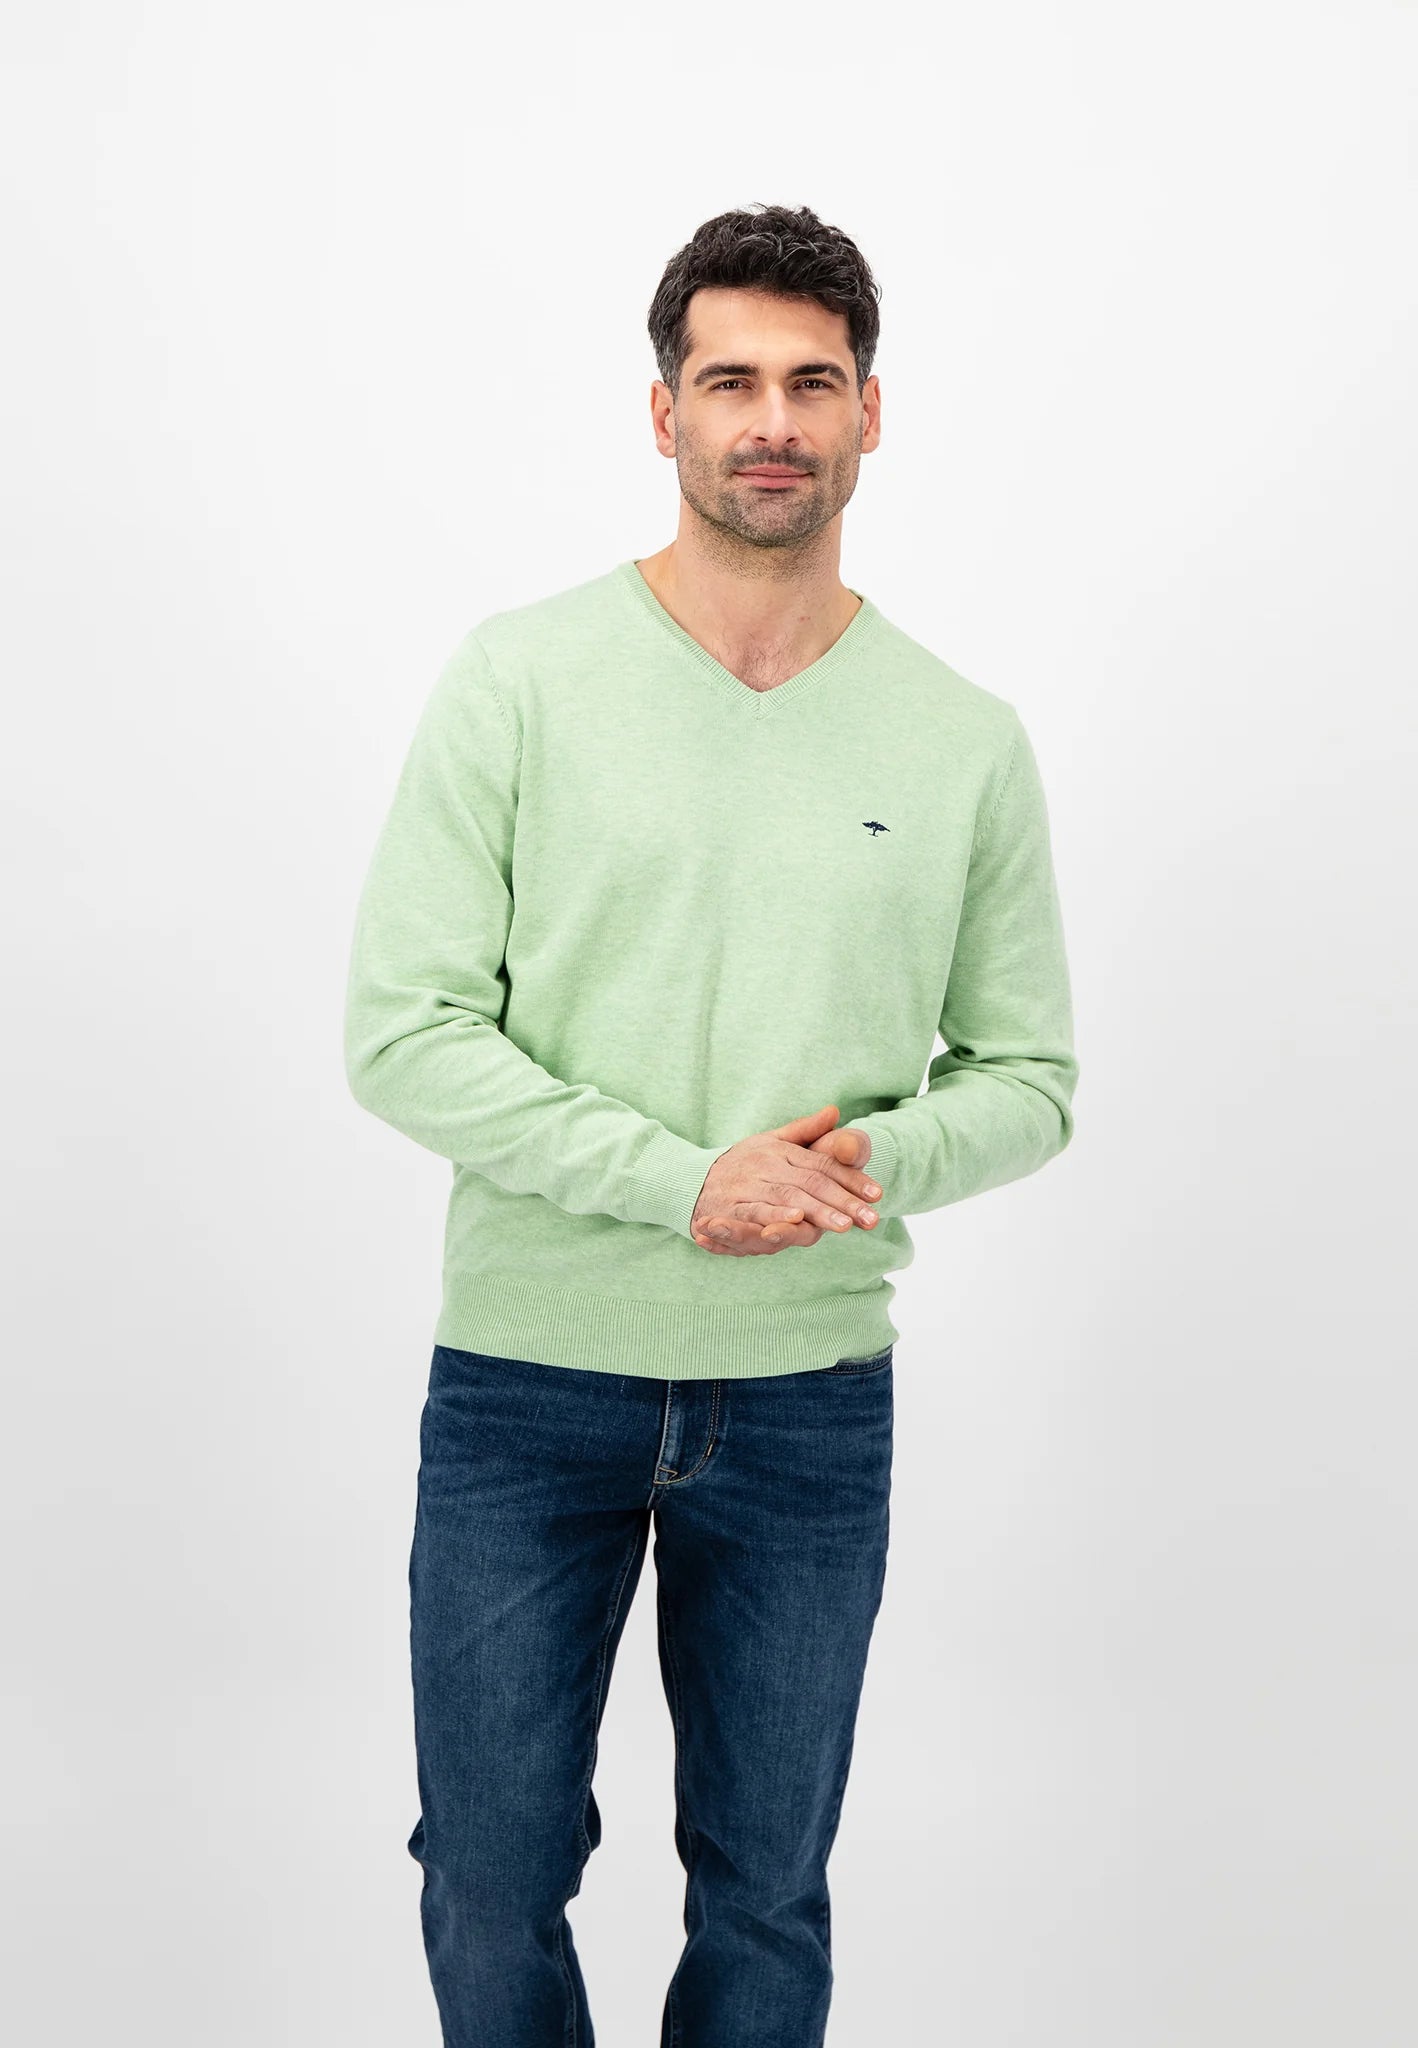 SOFT COTTON SWEATER WITH A V-NECK - Soft Green